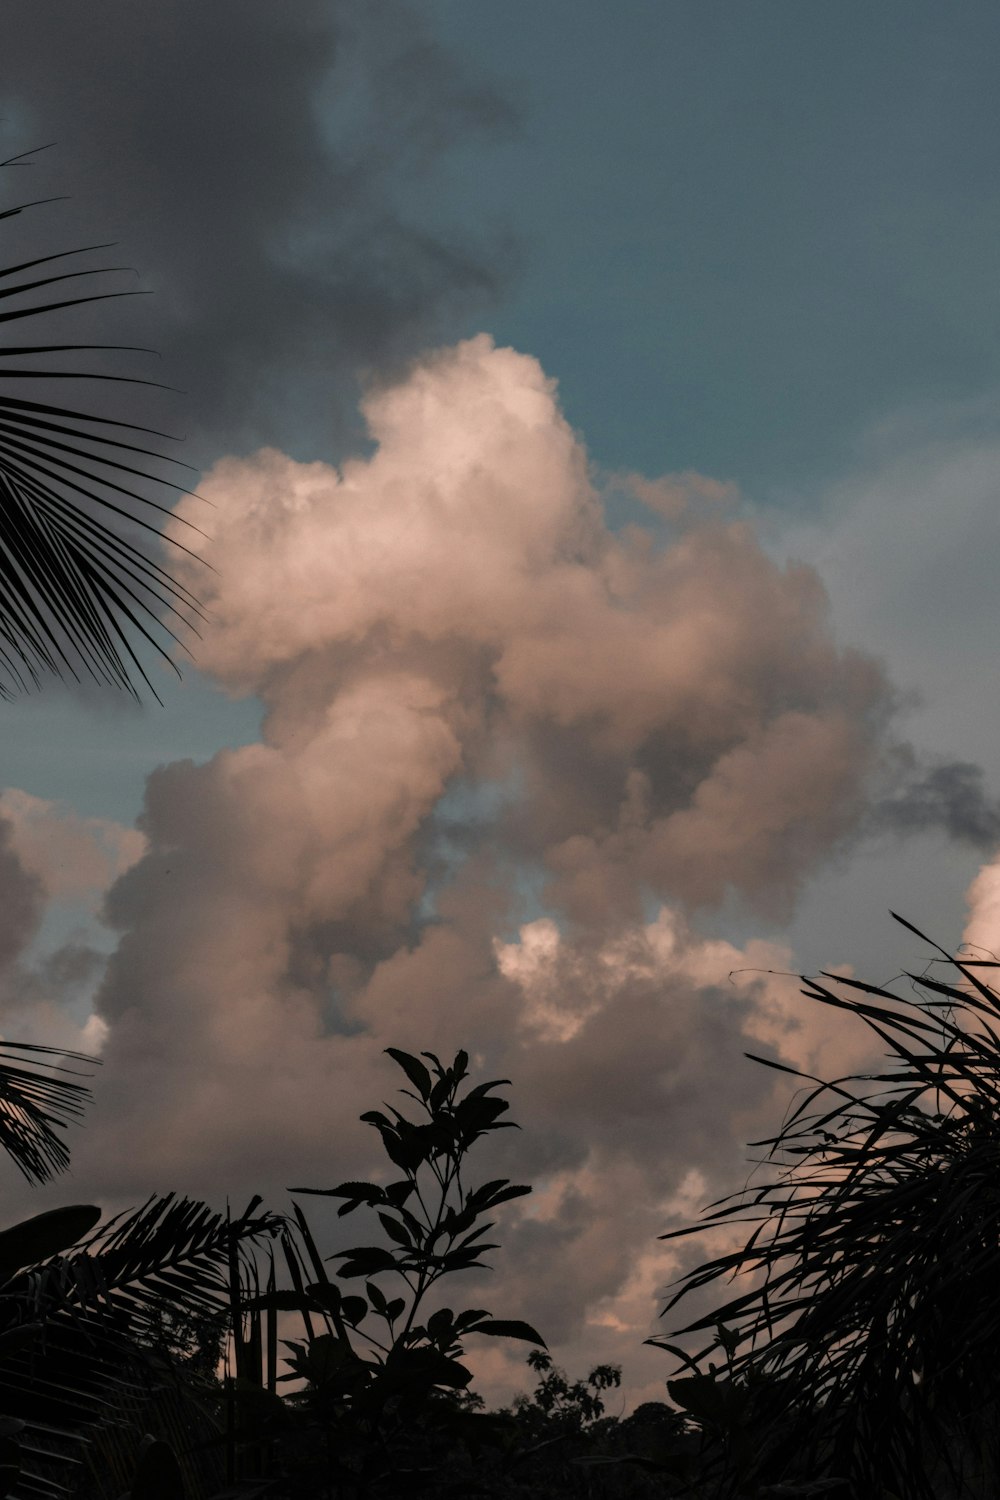 a view of a cloudy sky with palm trees in the foreground